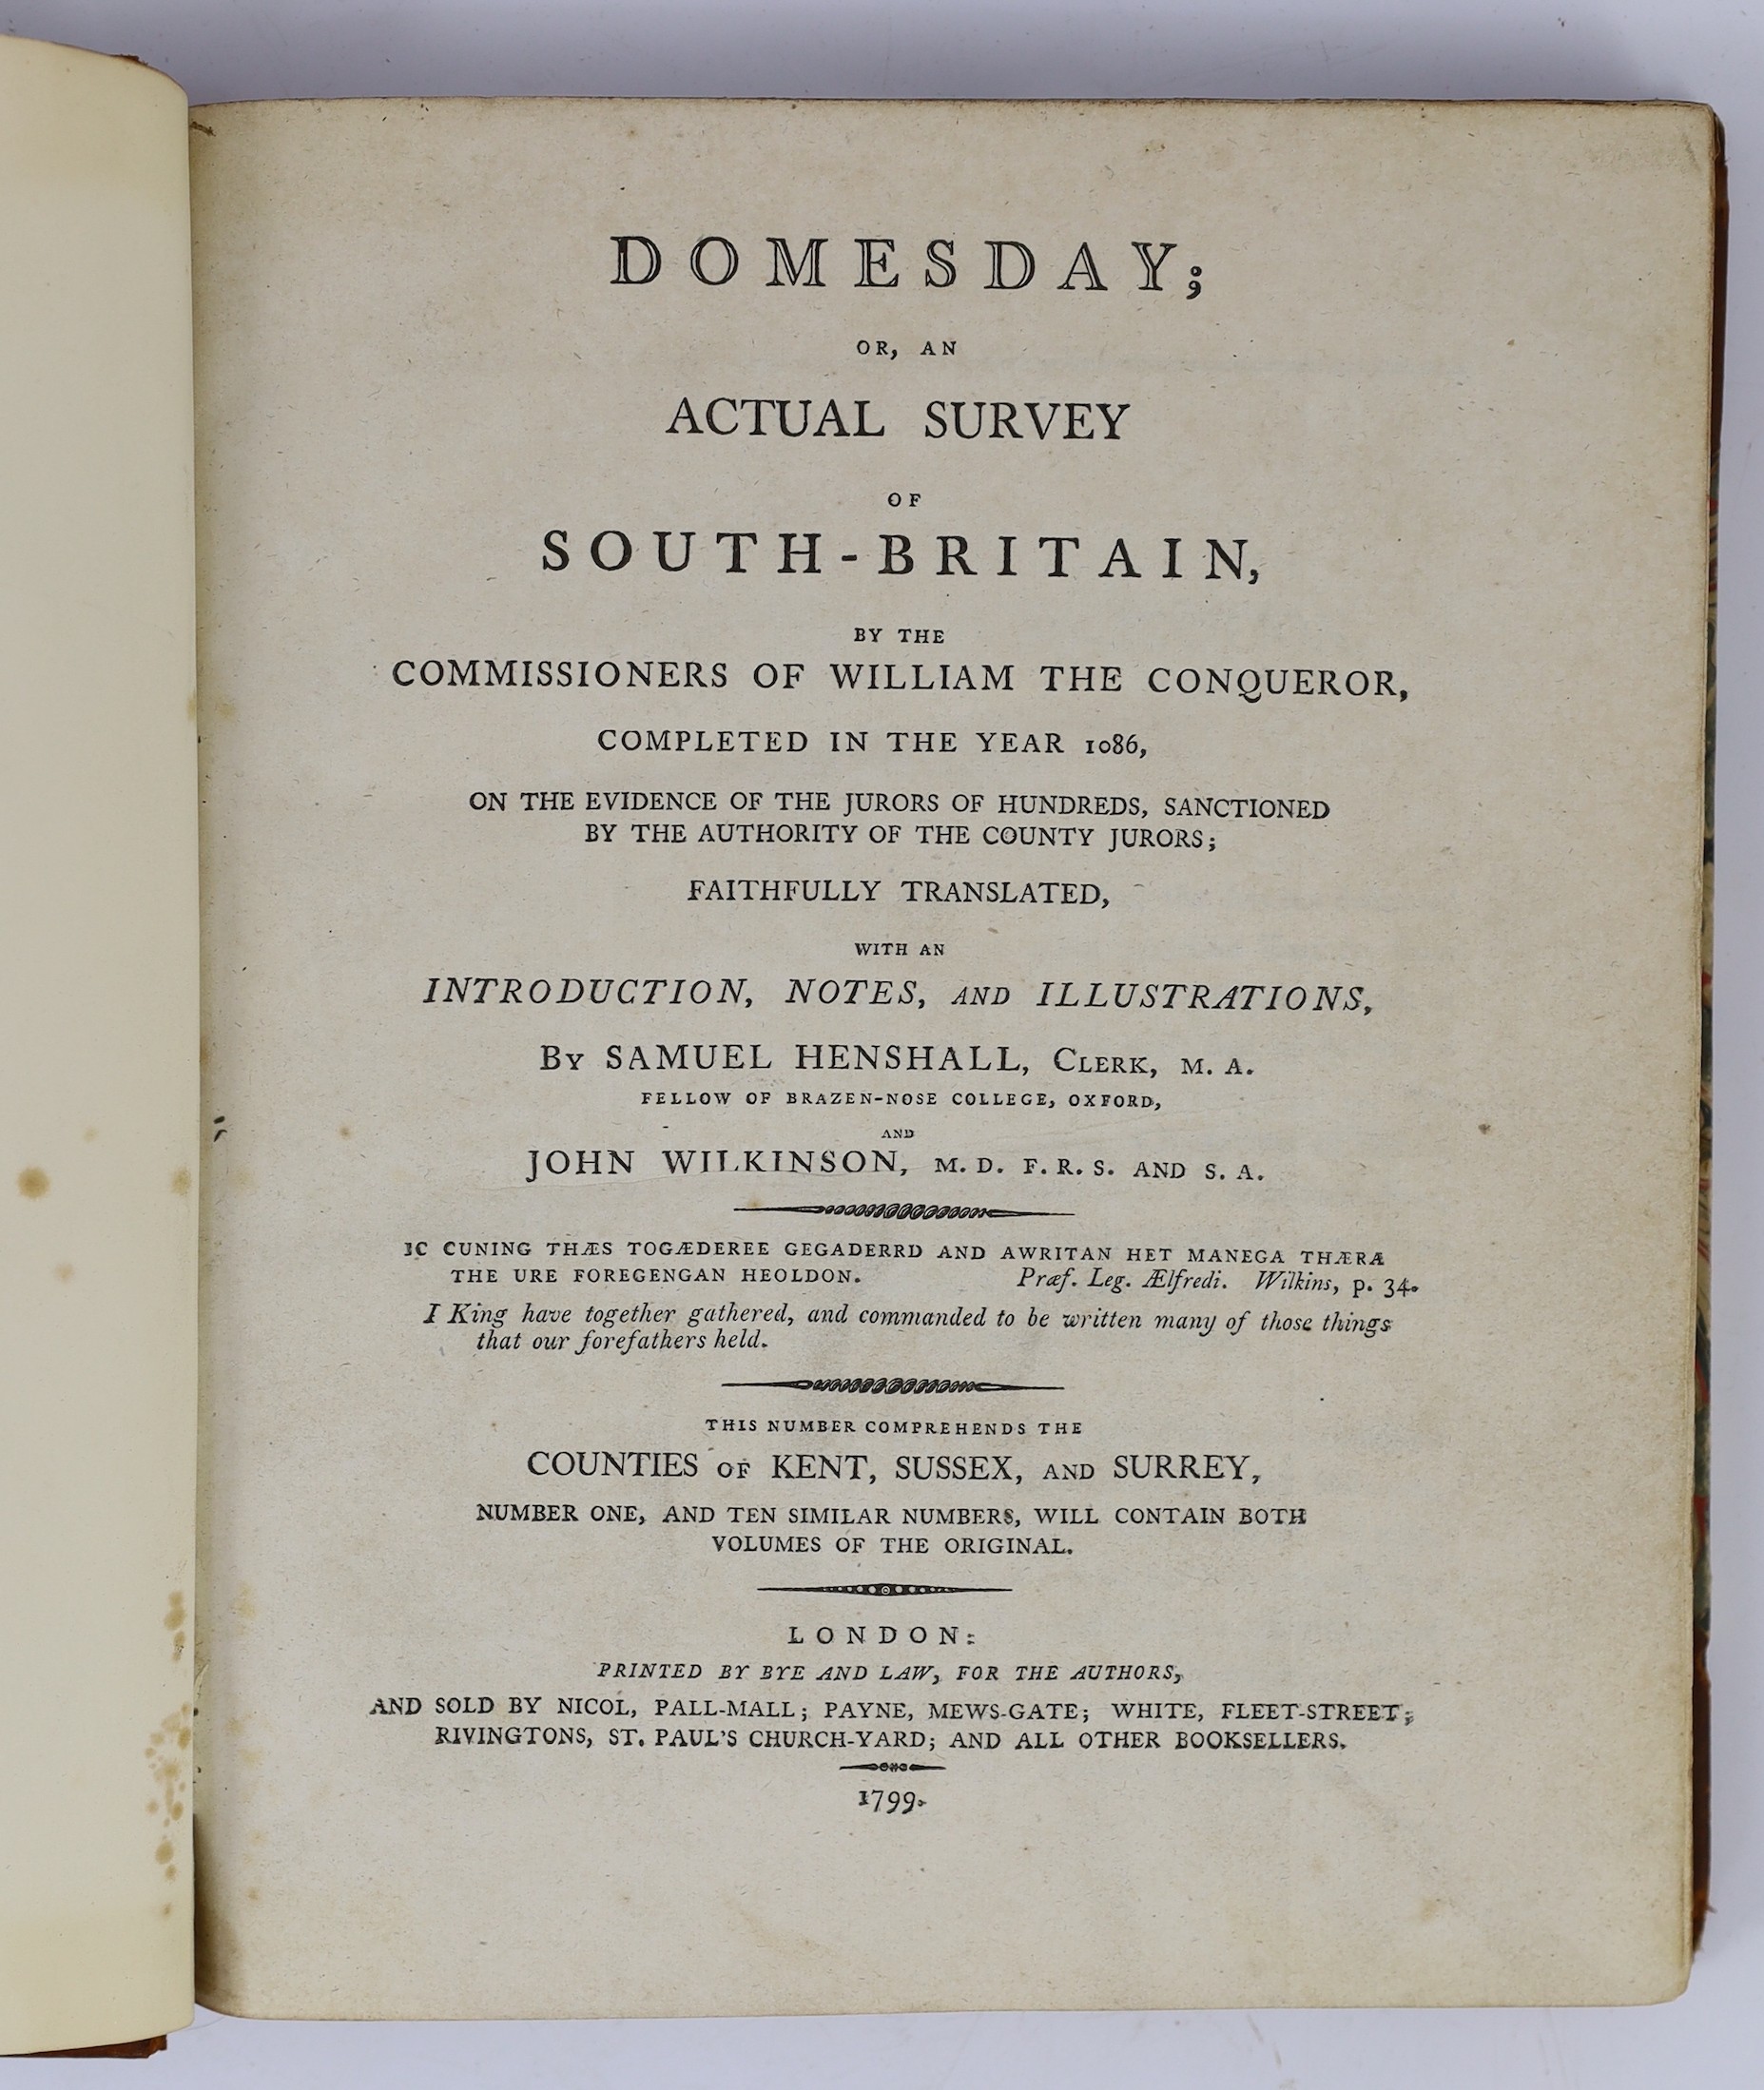 KENT: Domesday; or, an Actual Survey of South Britain, by the Commissioners of William the Conqueror....faithfully translated, with an introduction, notes, and illustrations, by Samuel Henshall and John Wilkinson.... Thi